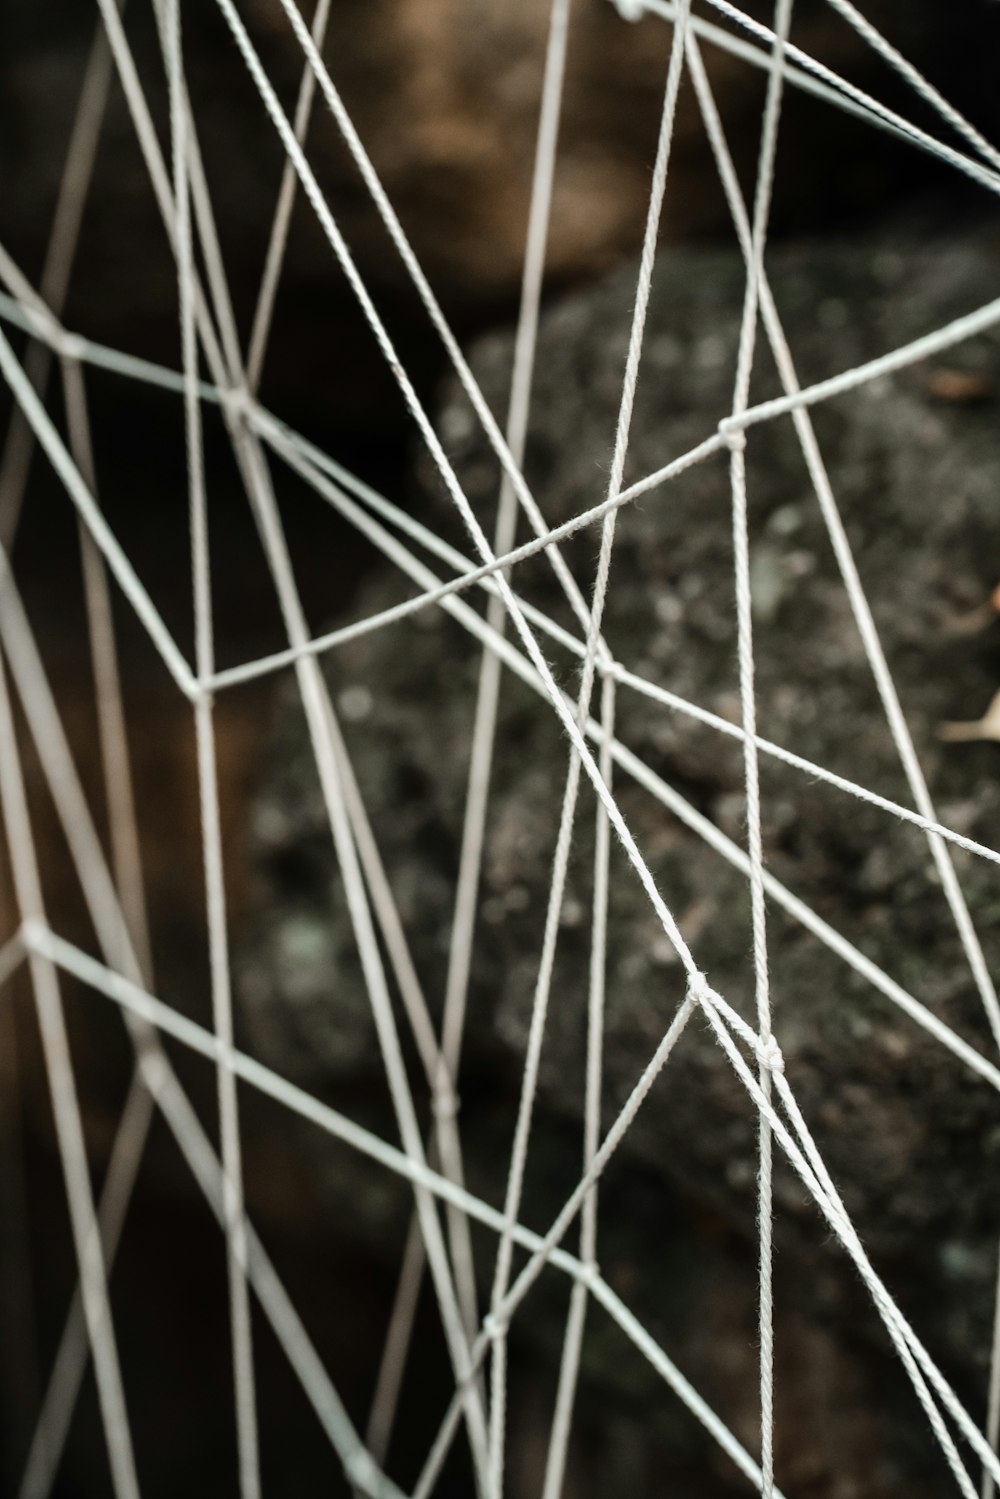 a close up of a bike spokes and spokes